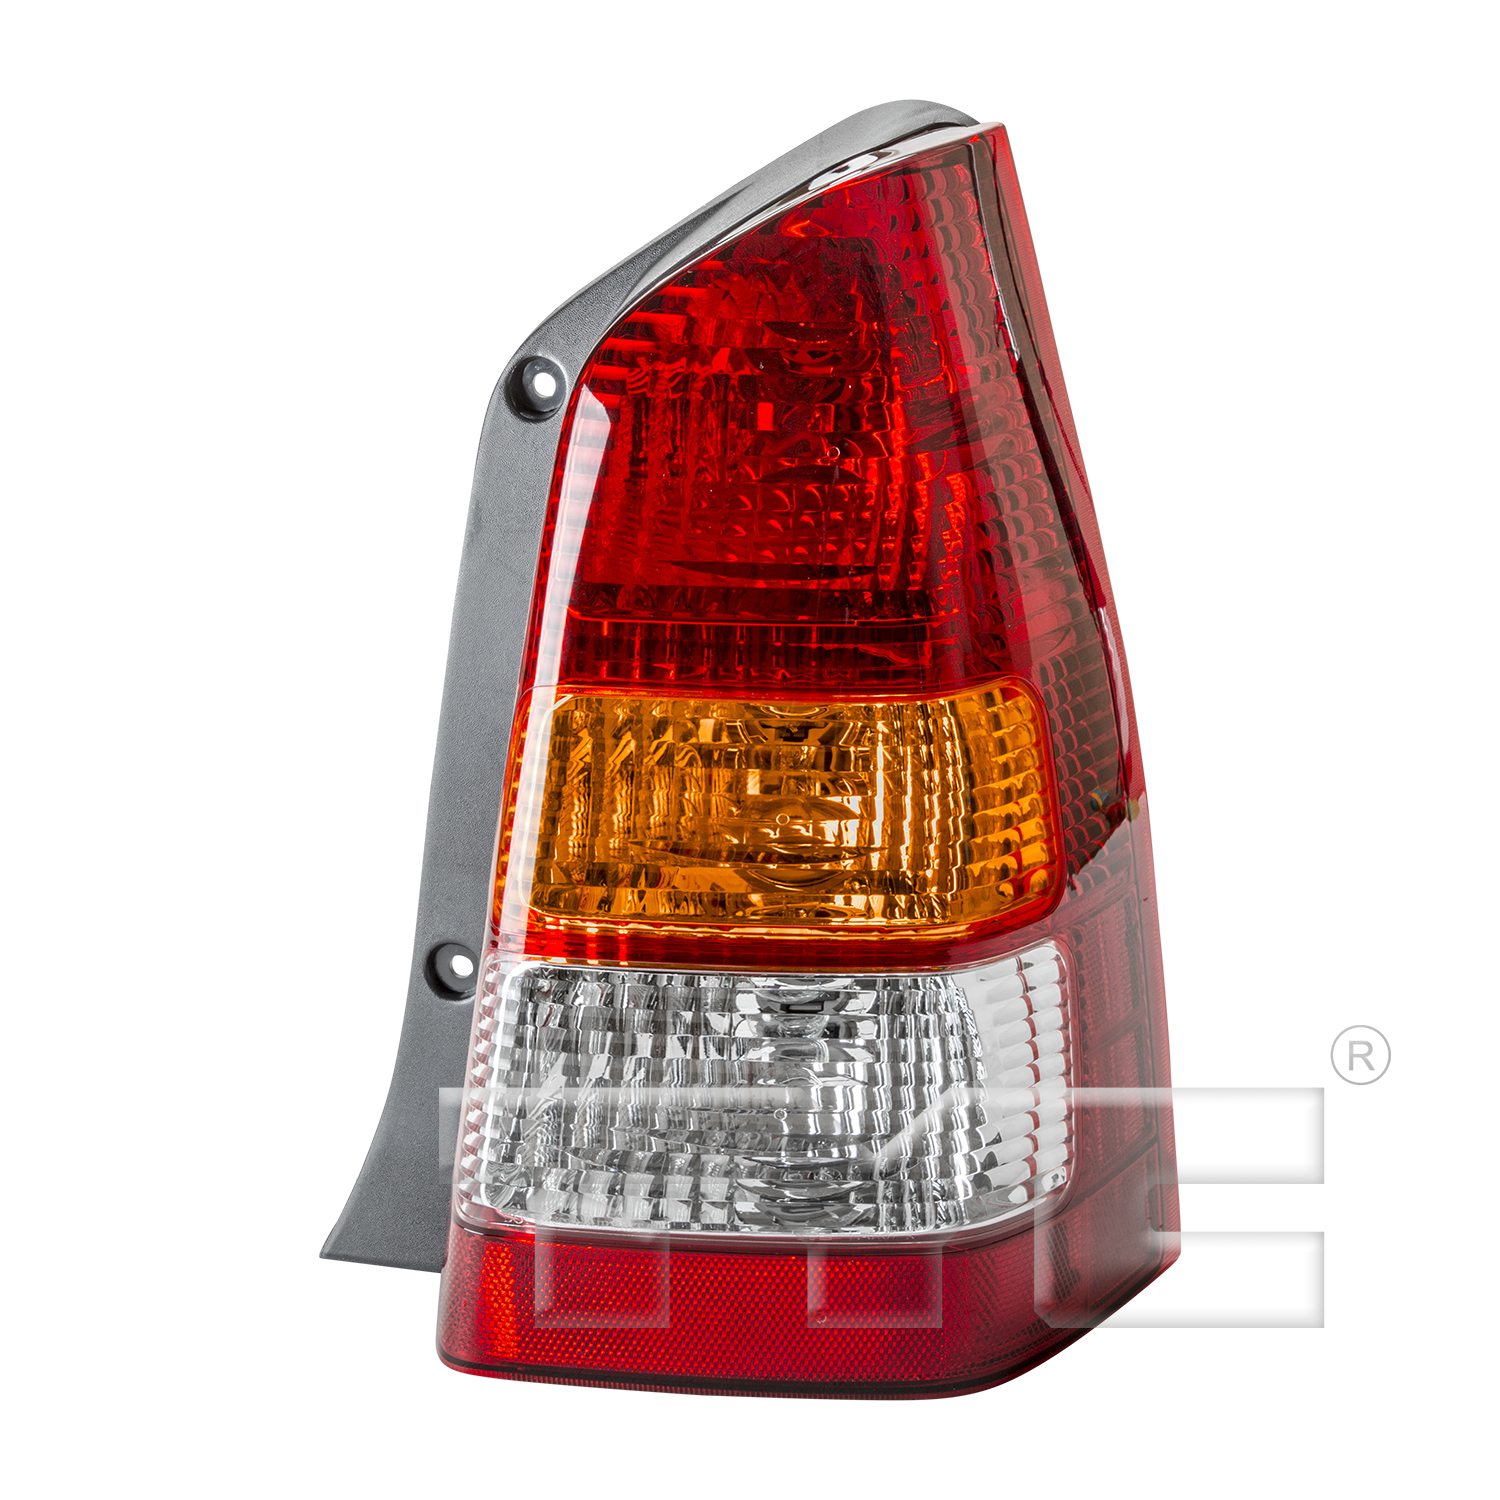 Aftermarket TAILLIGHTS for MAZDA - TRIBUTE, TRIBUTE,01-04,RT Taillamp assy